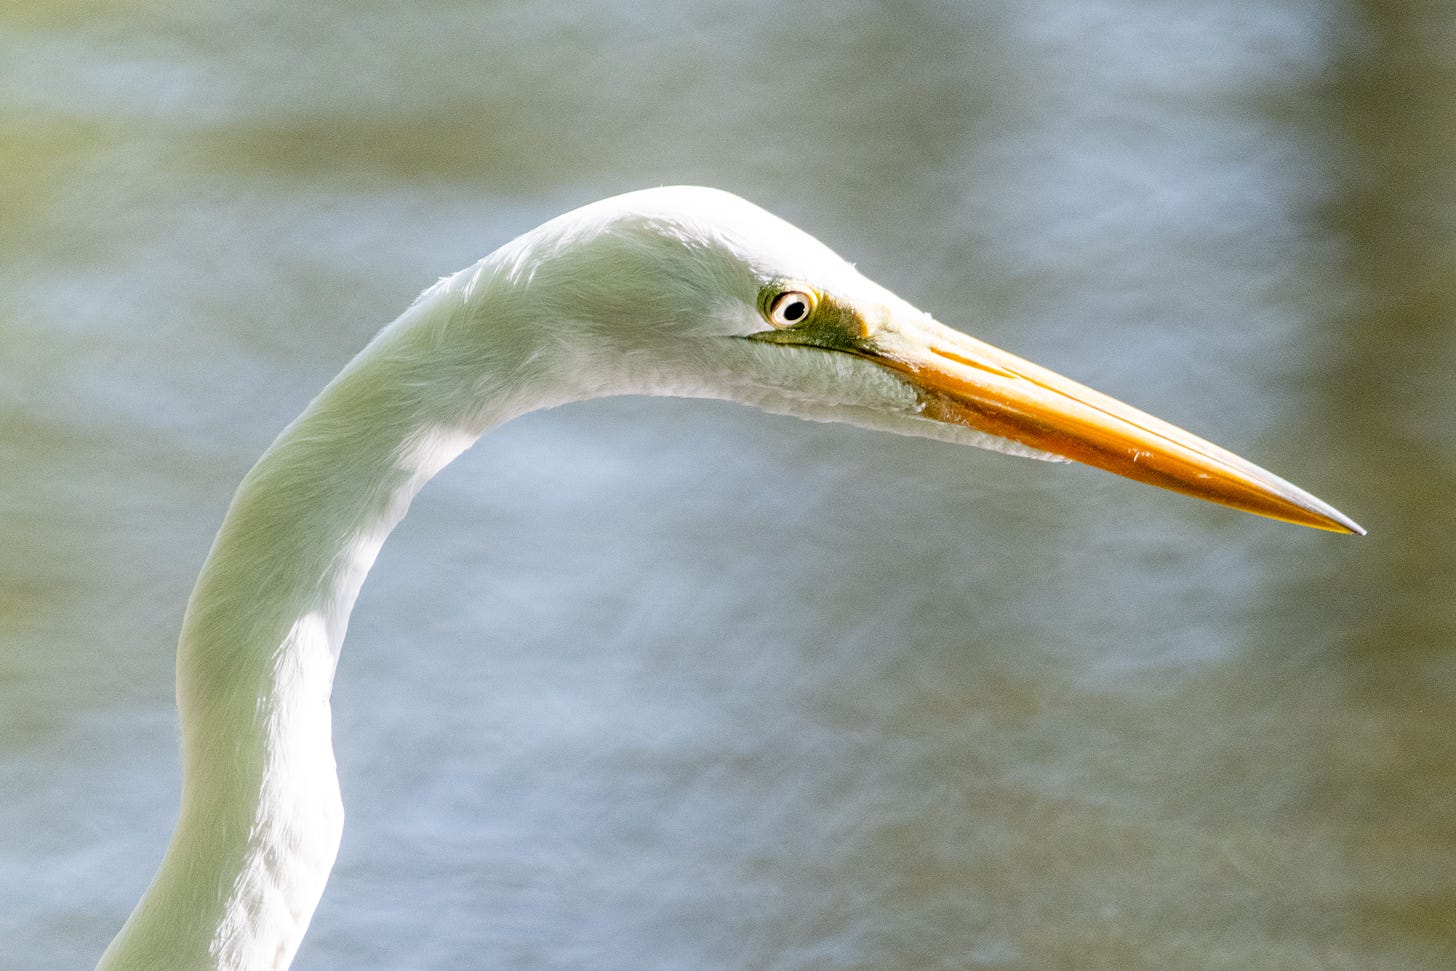 A close-up on the head and neck of a great egret, lit from above by the sun and from below by the reflection off the water